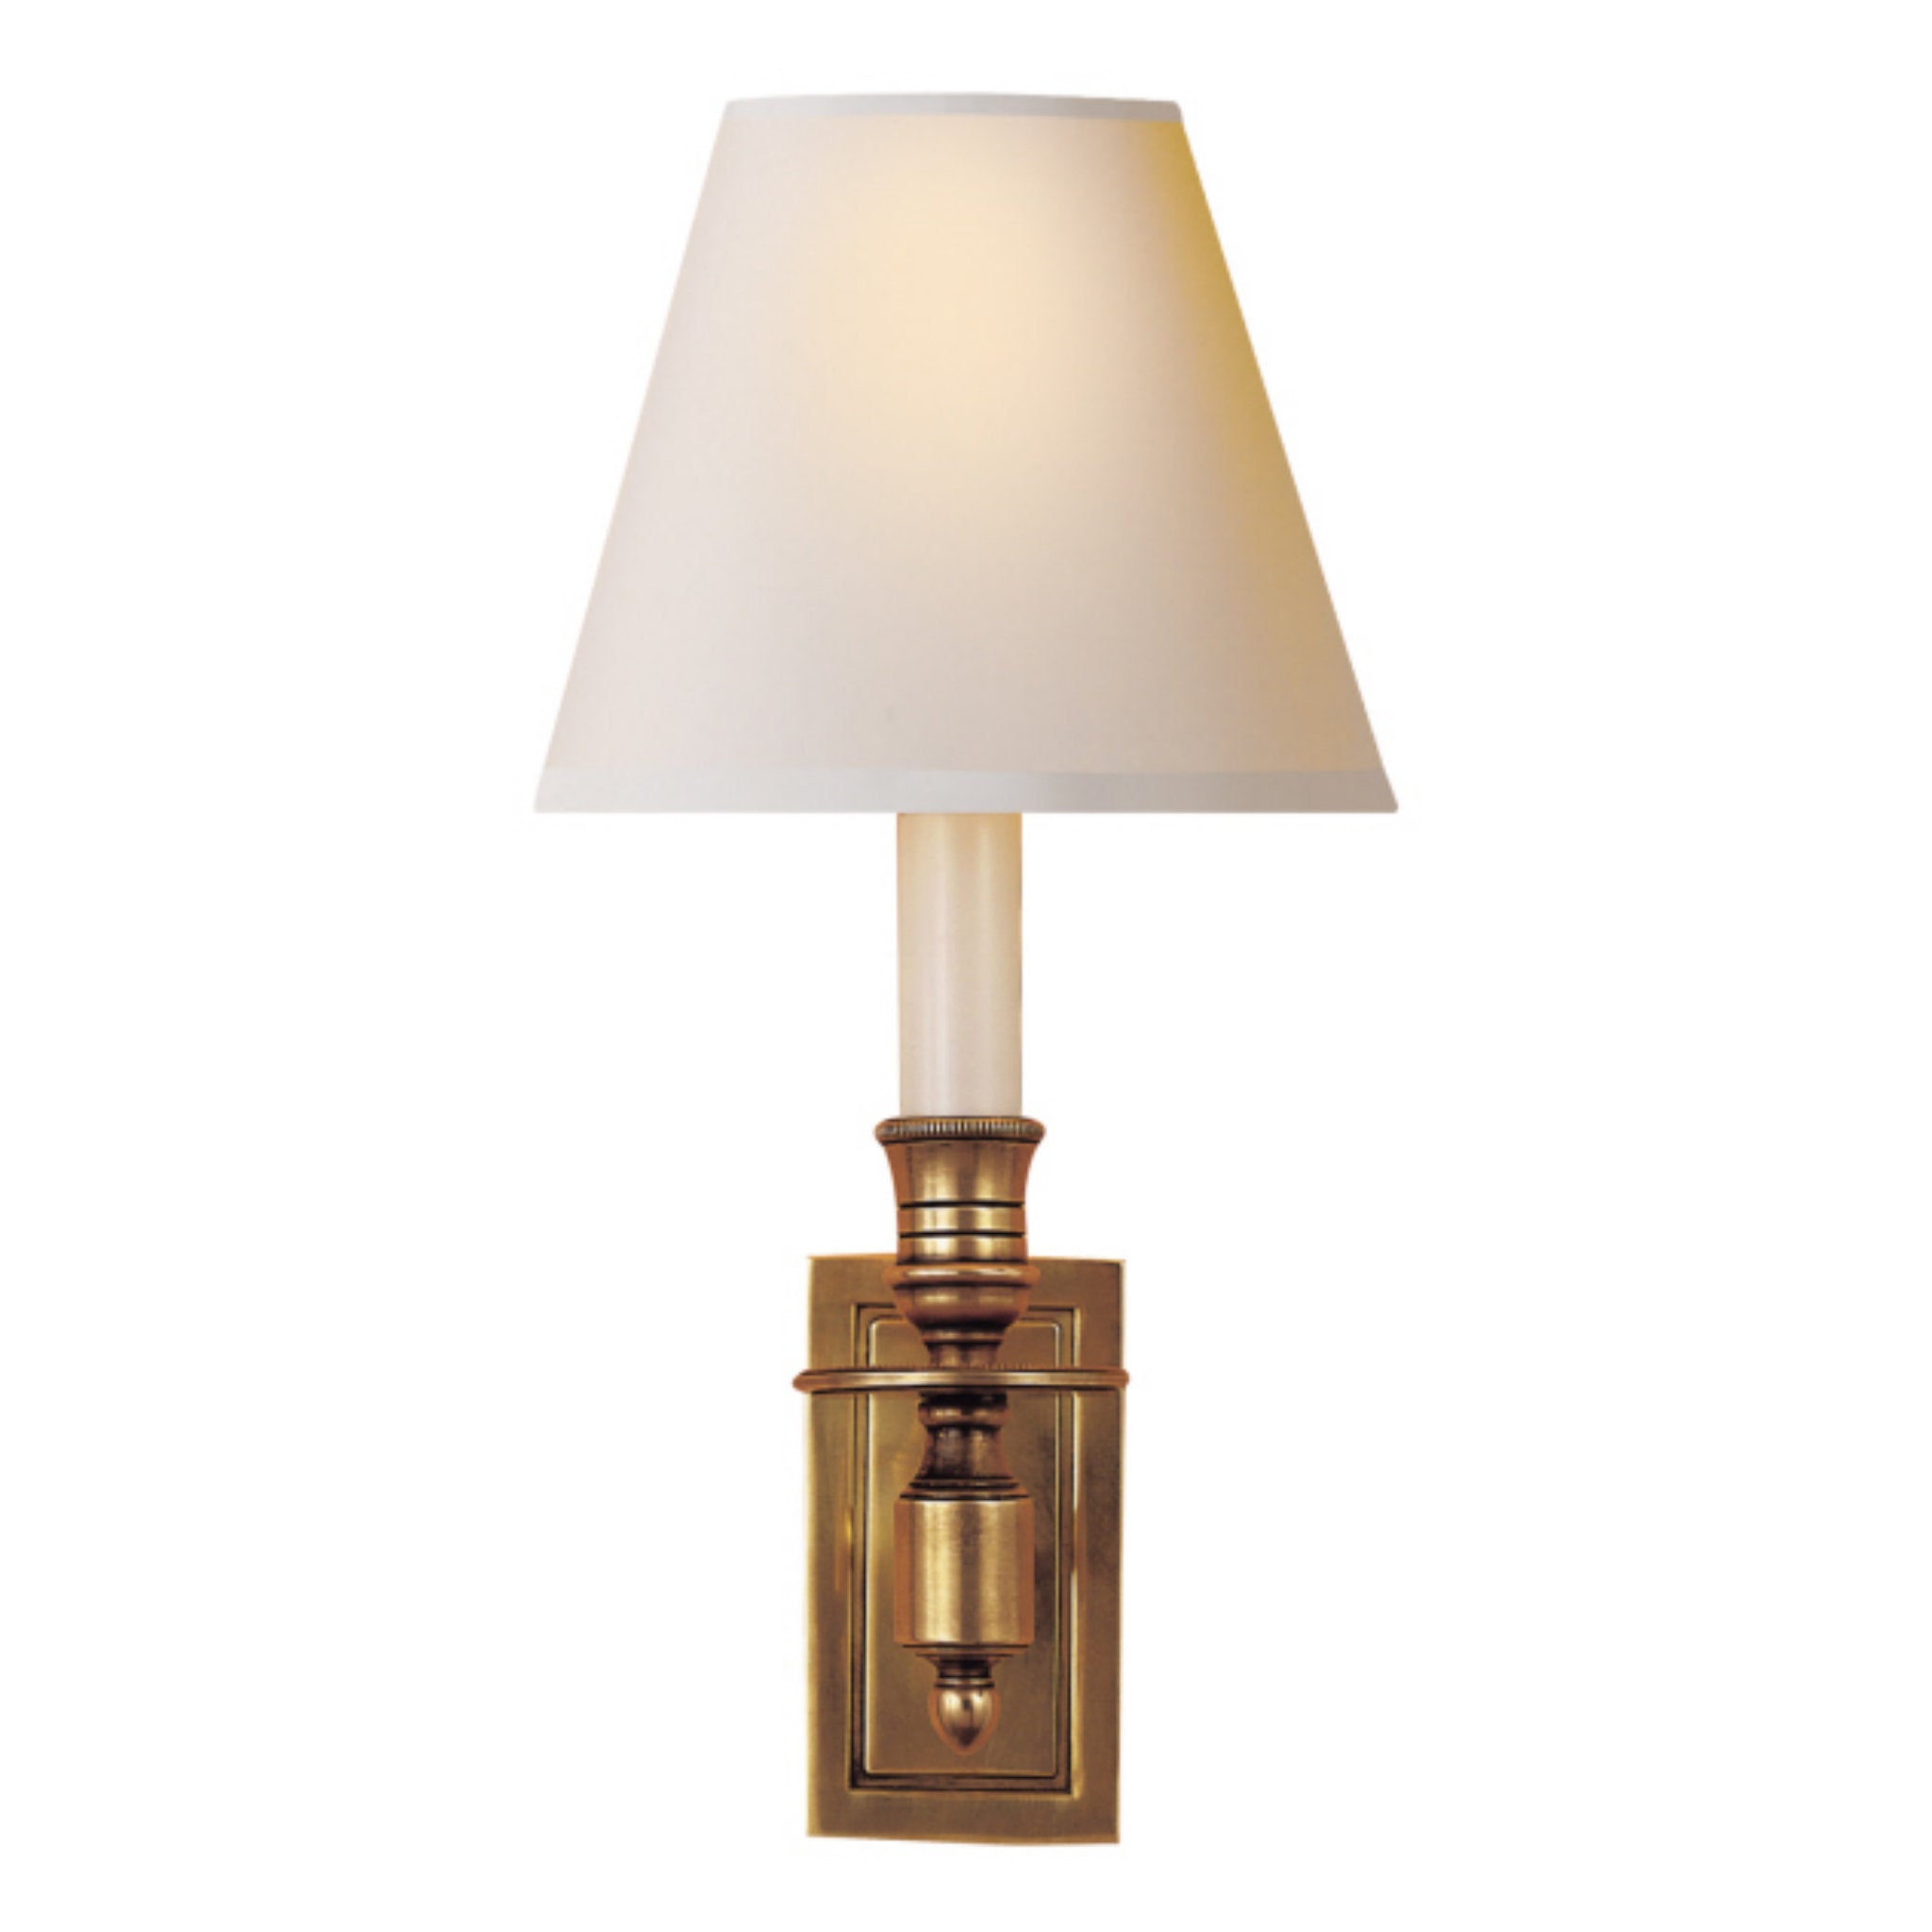 Buy French Cuff Sconce By Visual Comfort